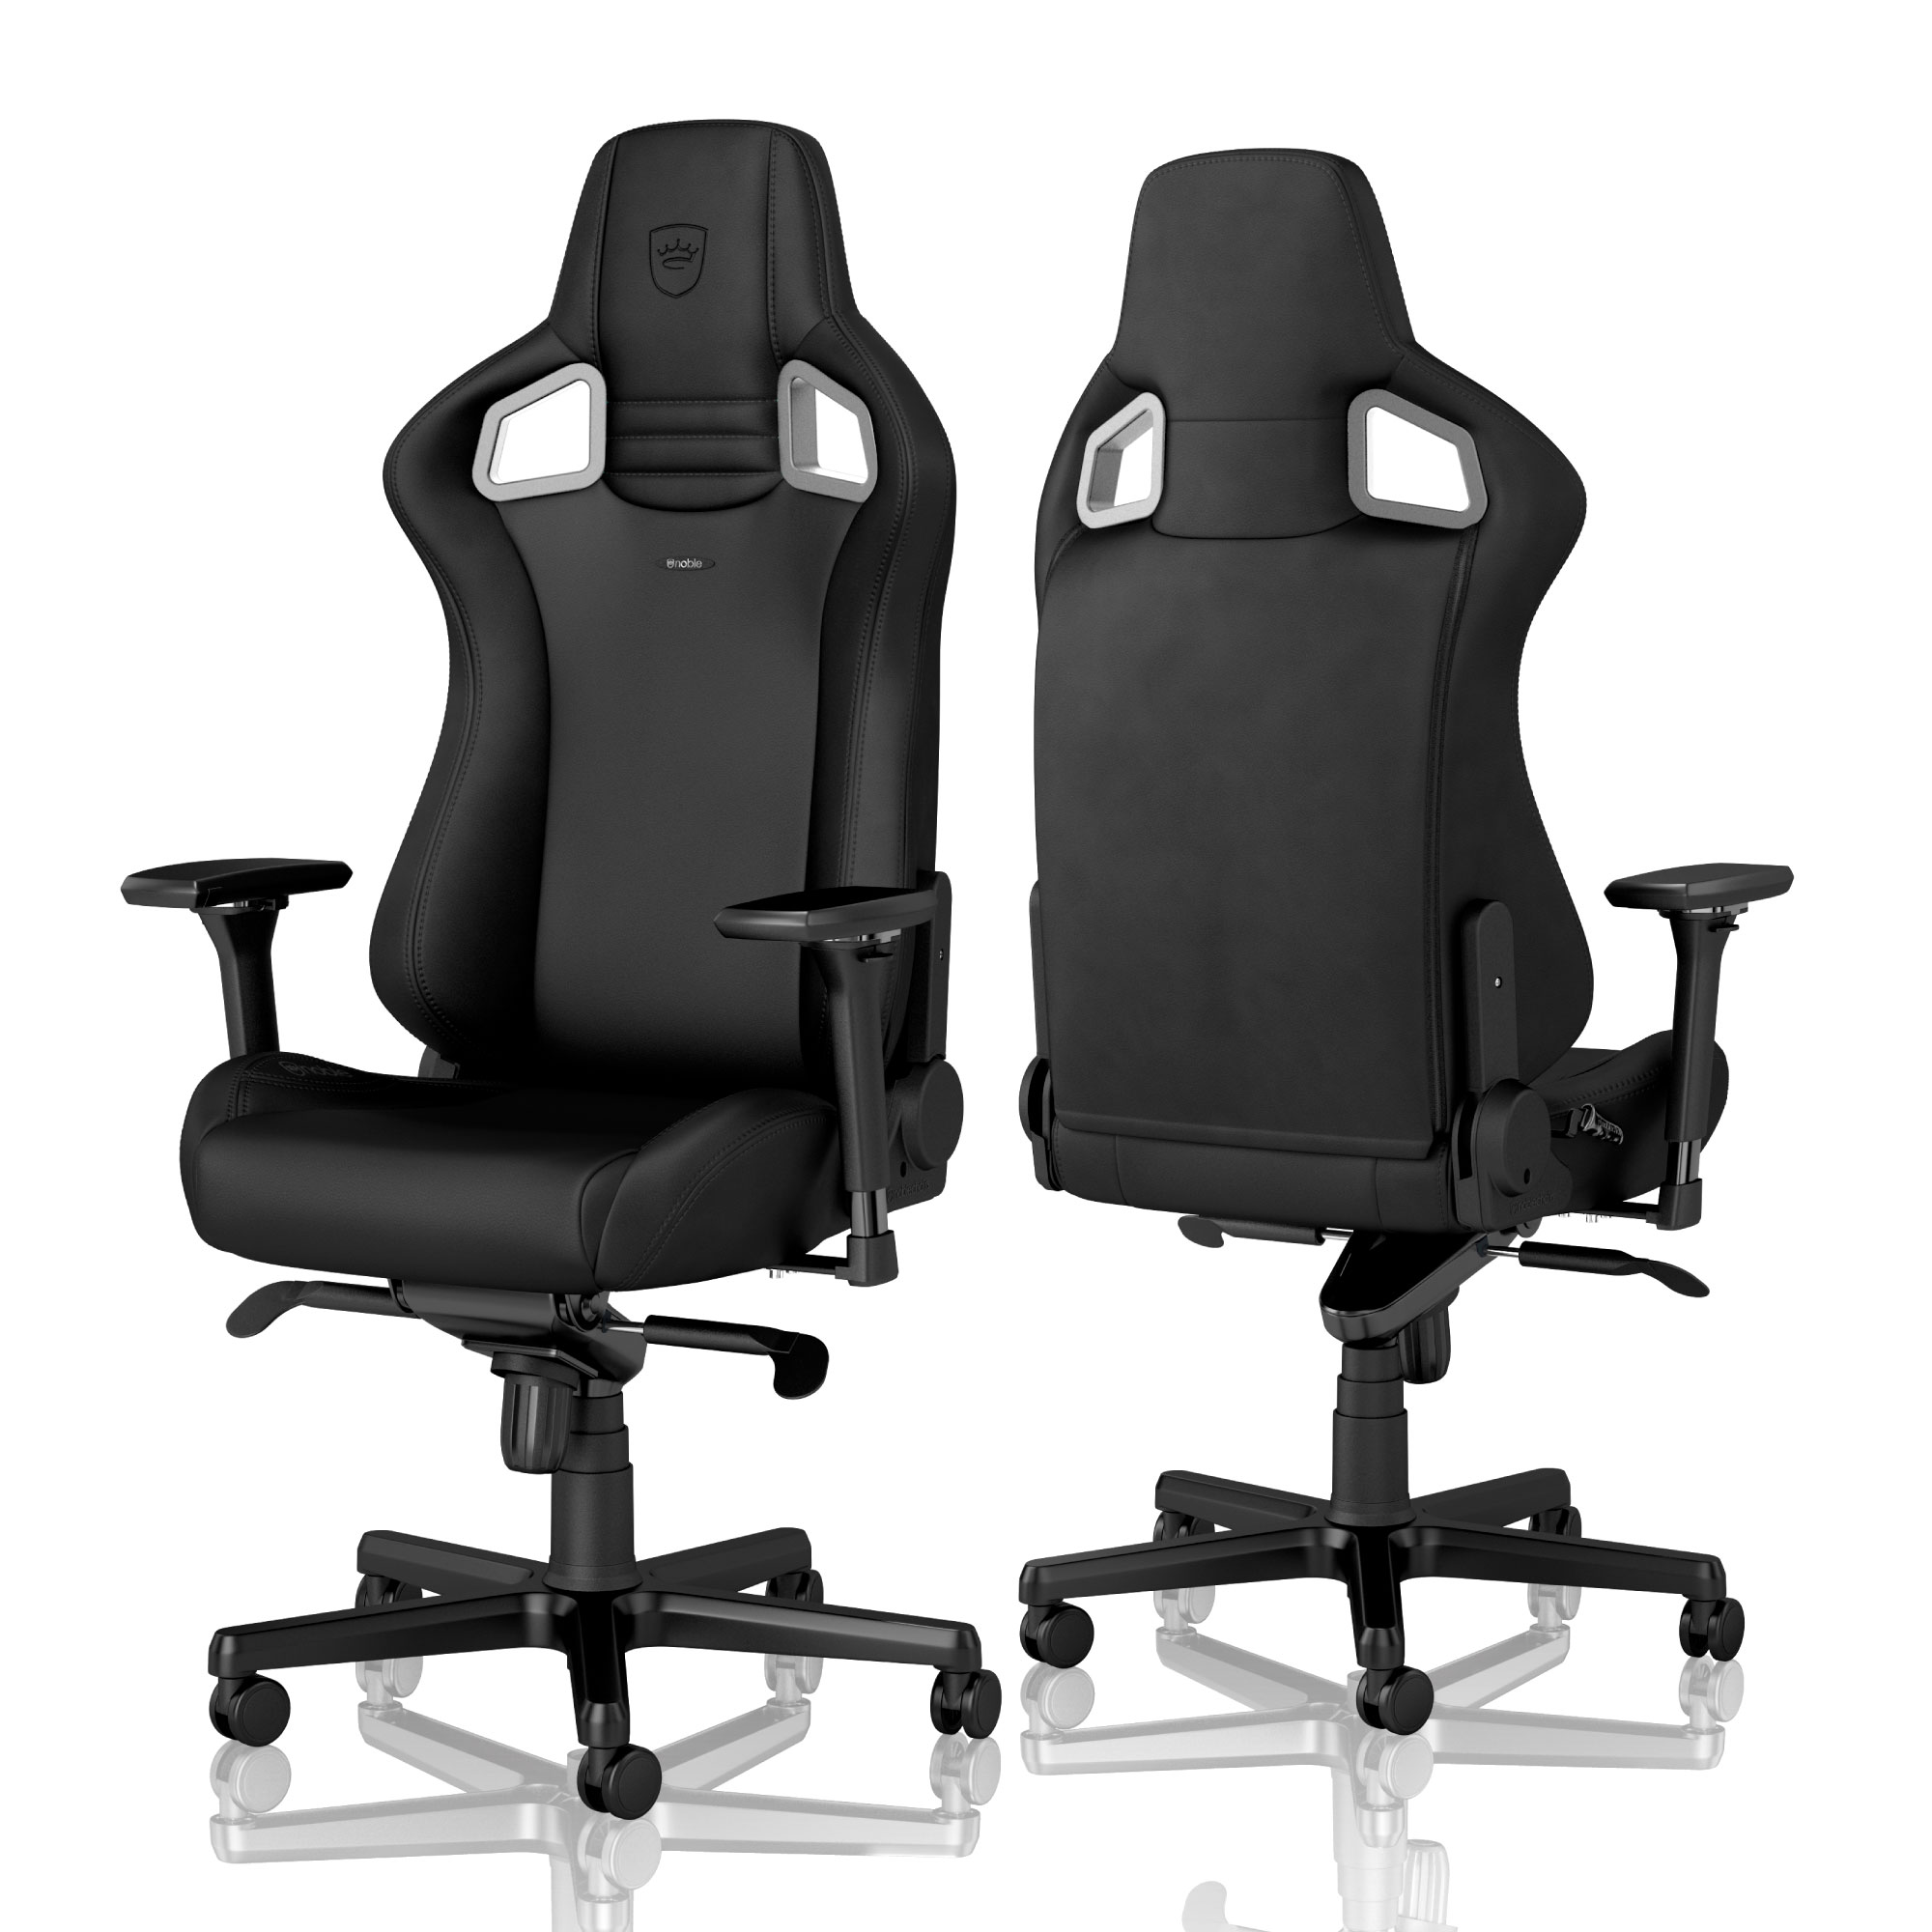 noblechairs / Nitro Concepts - ゲーミングチェア - 株式会社アーキサイト